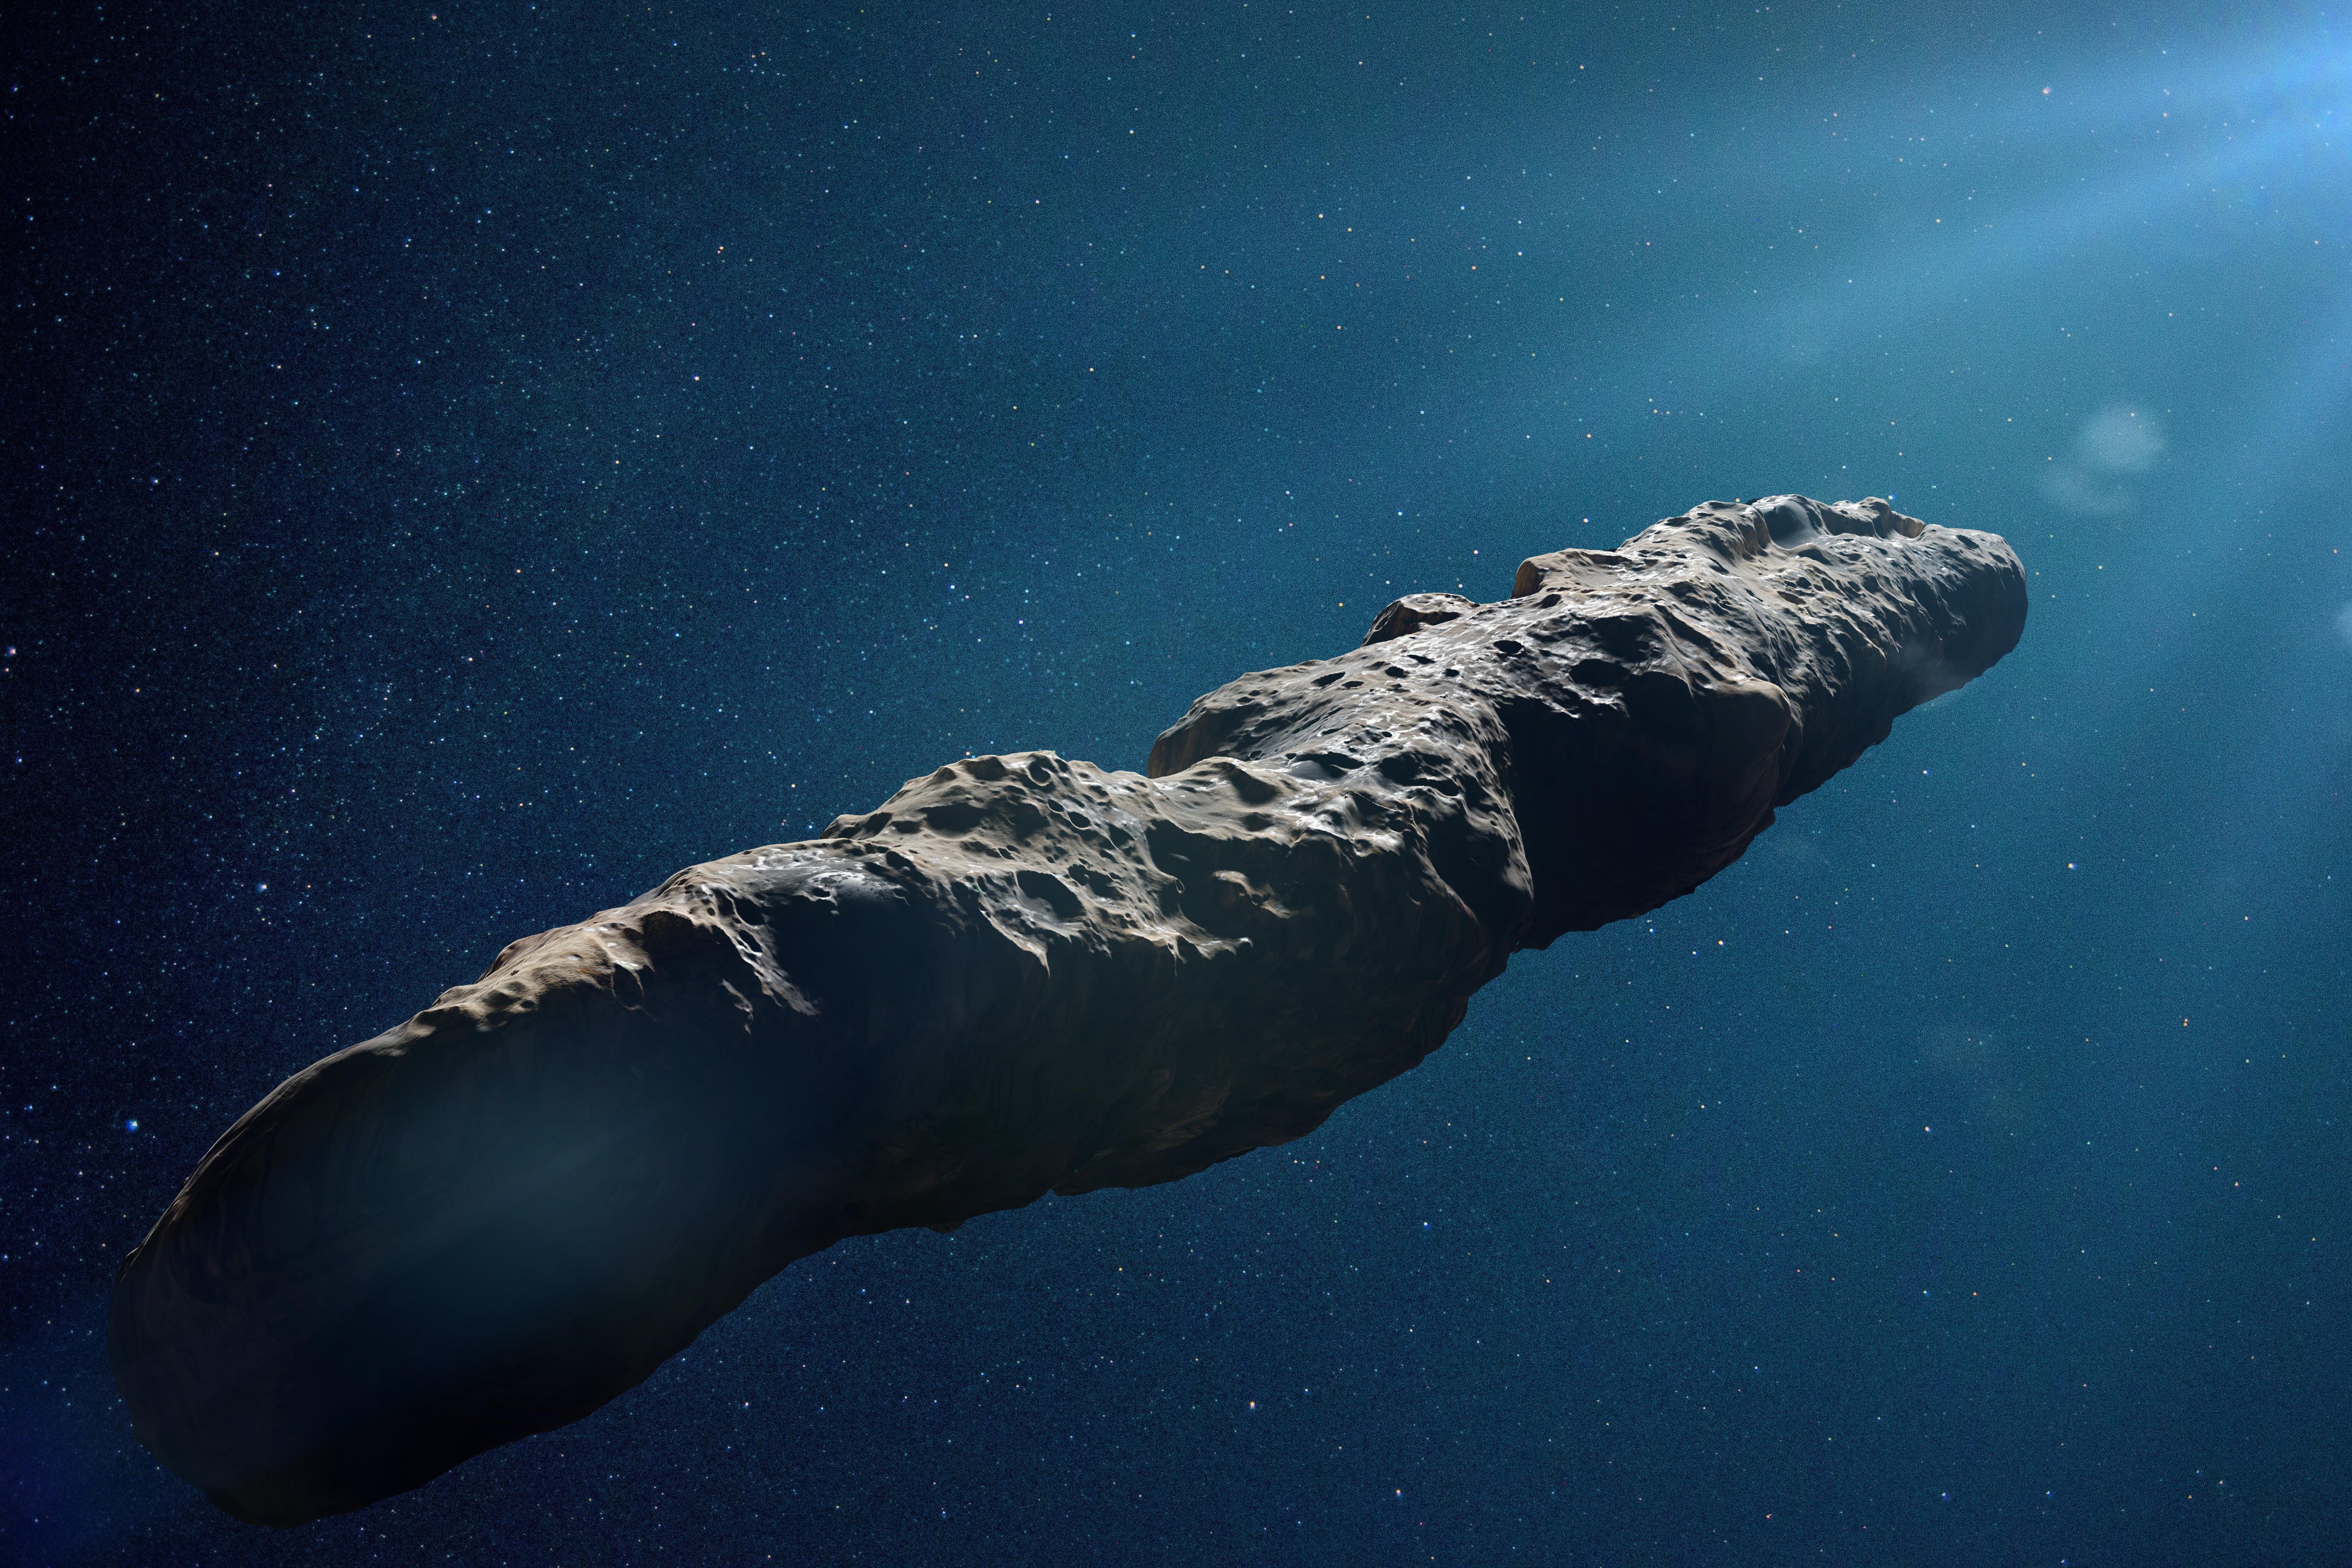 Was ‘Oumuamua, the first known interstellar object, less strange than we thought?

End-shutdown